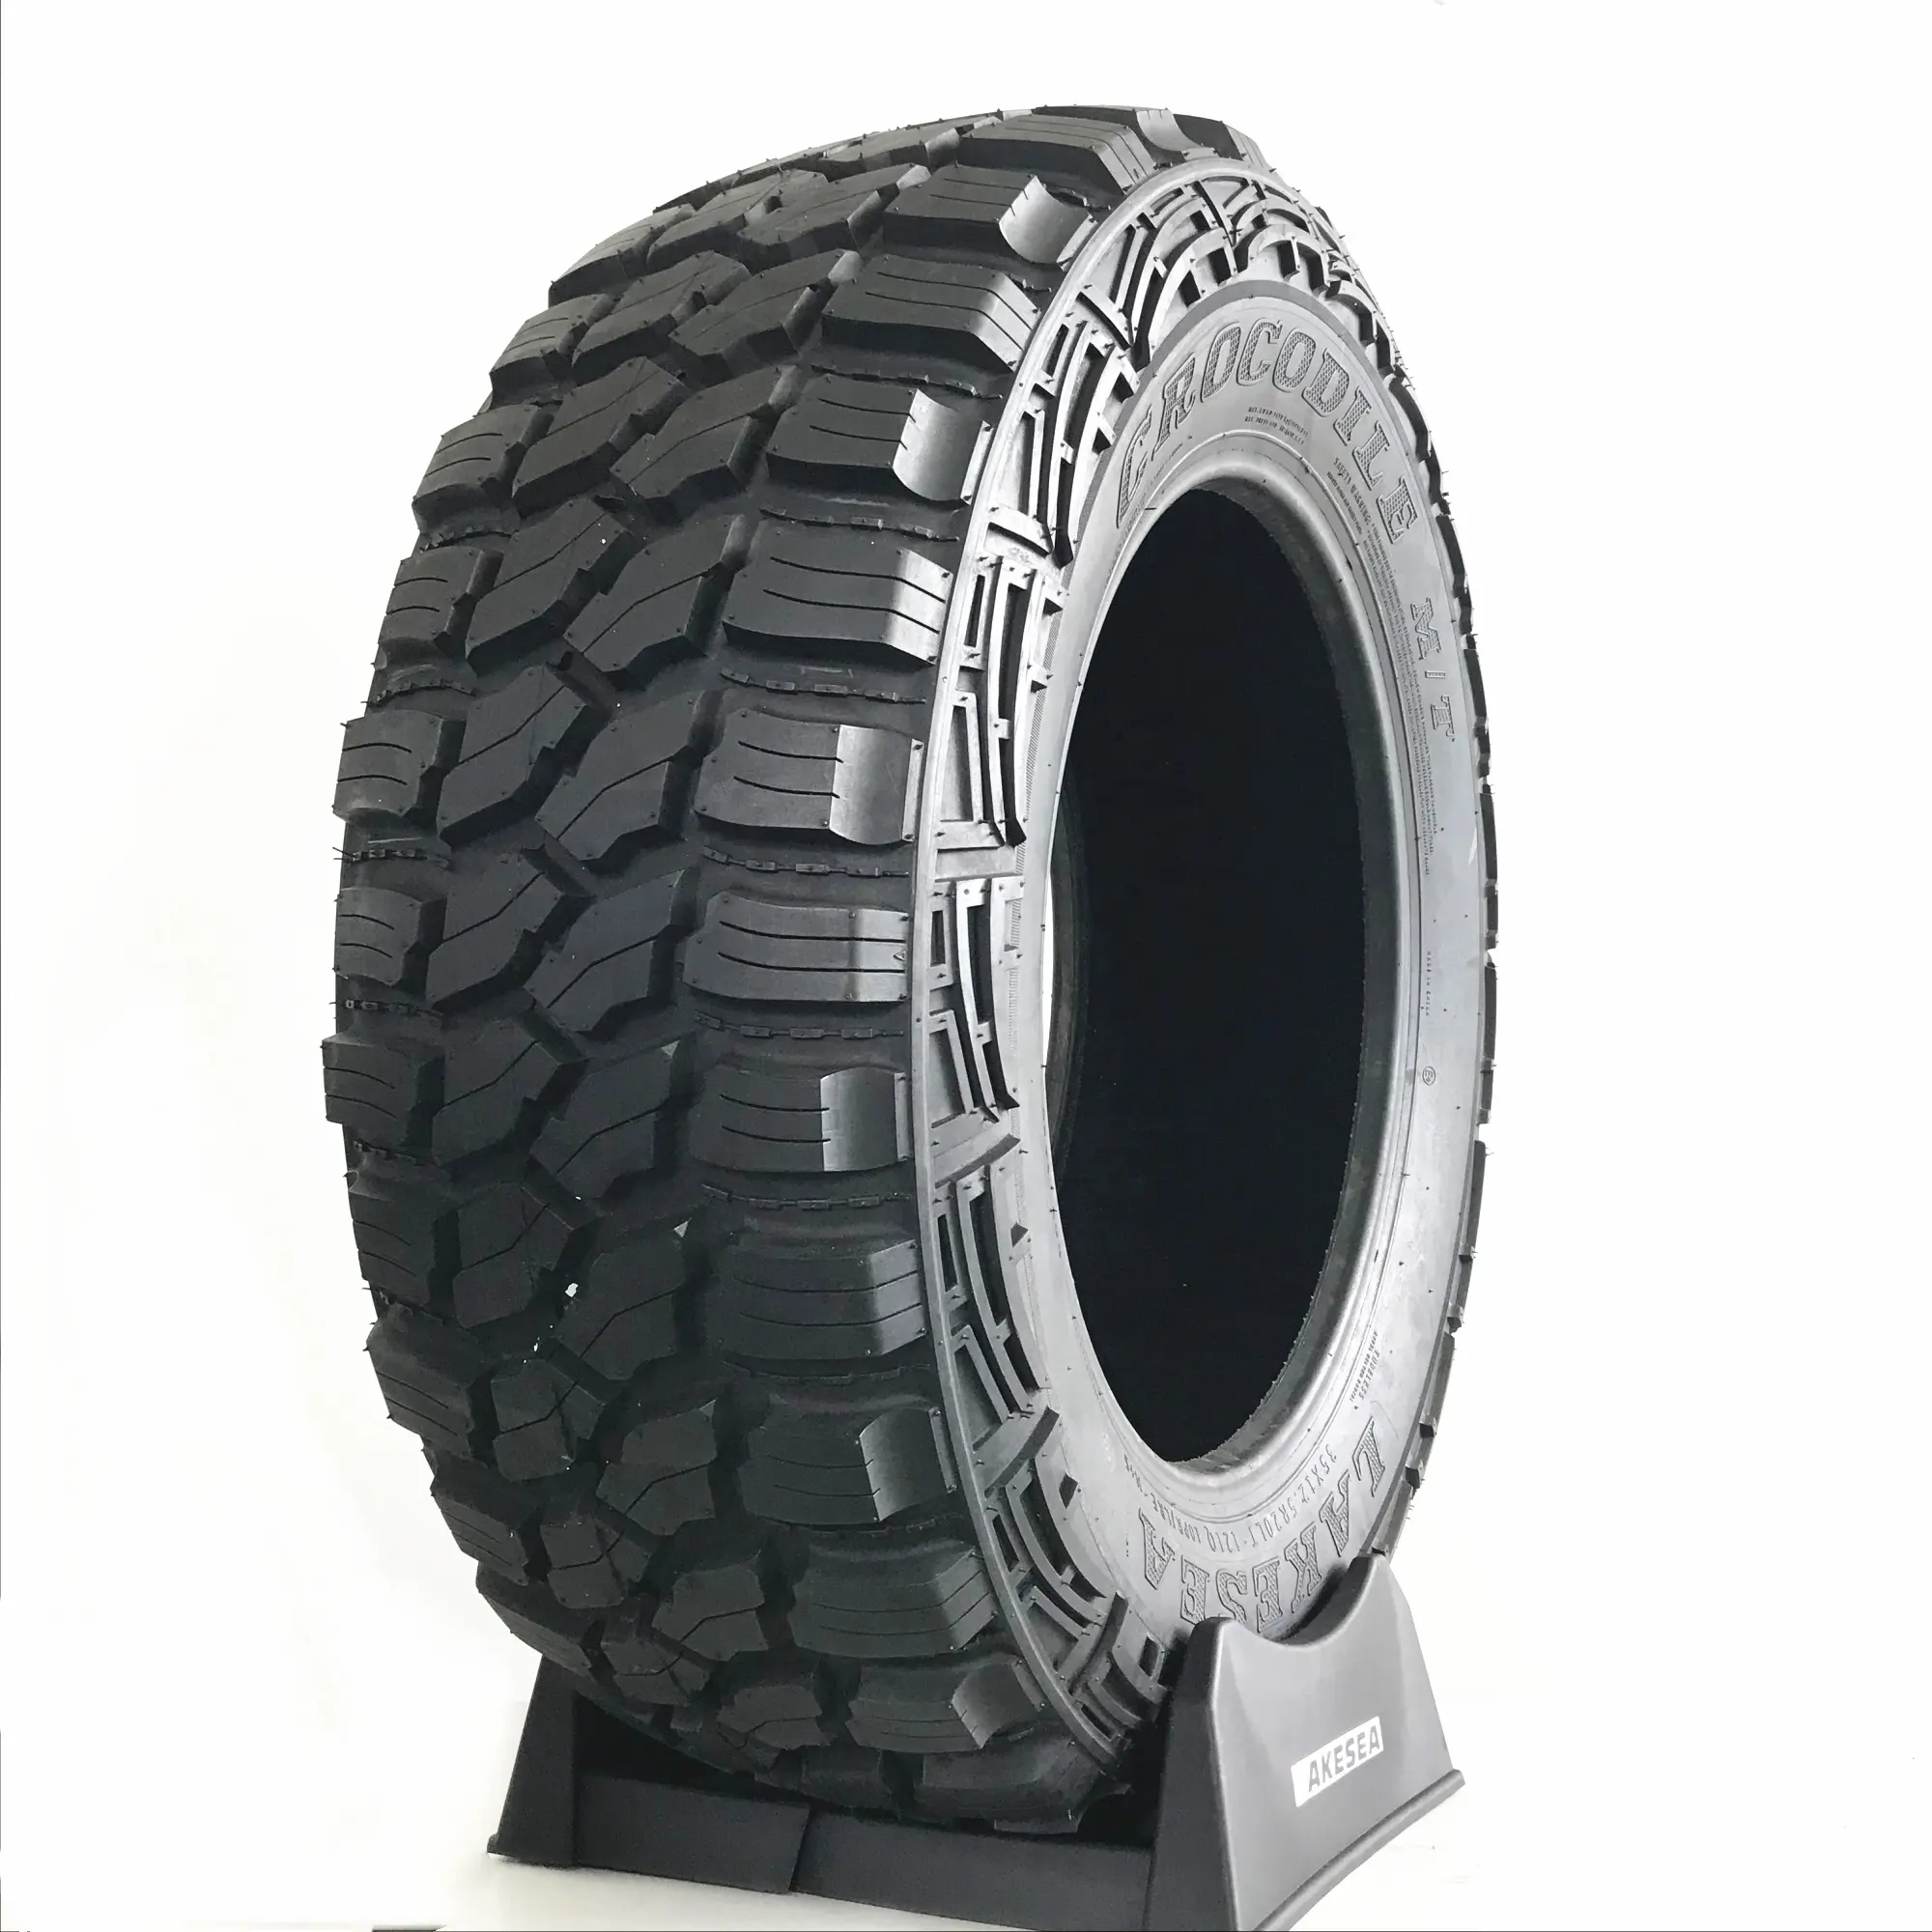 Lakesea mt tires 35x12.5r22 big MUD terrain tire size high quality brand in China